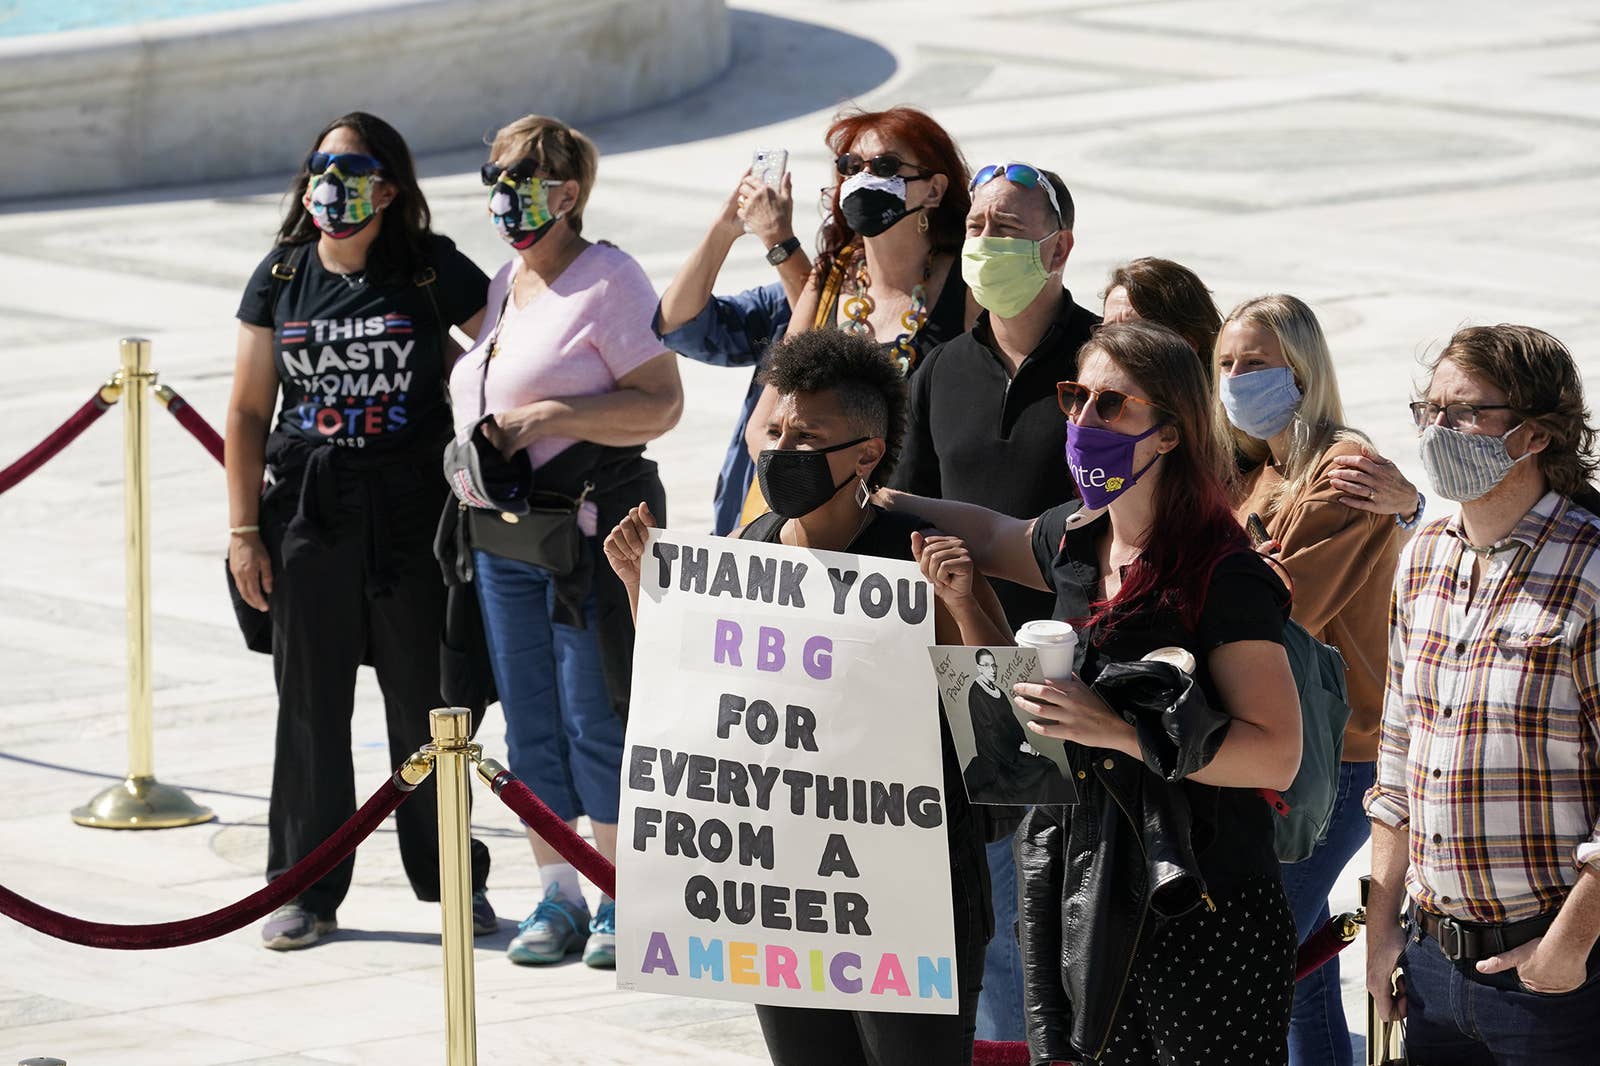 A young person holds a sign saying Thank you RGB for everything from a queer american